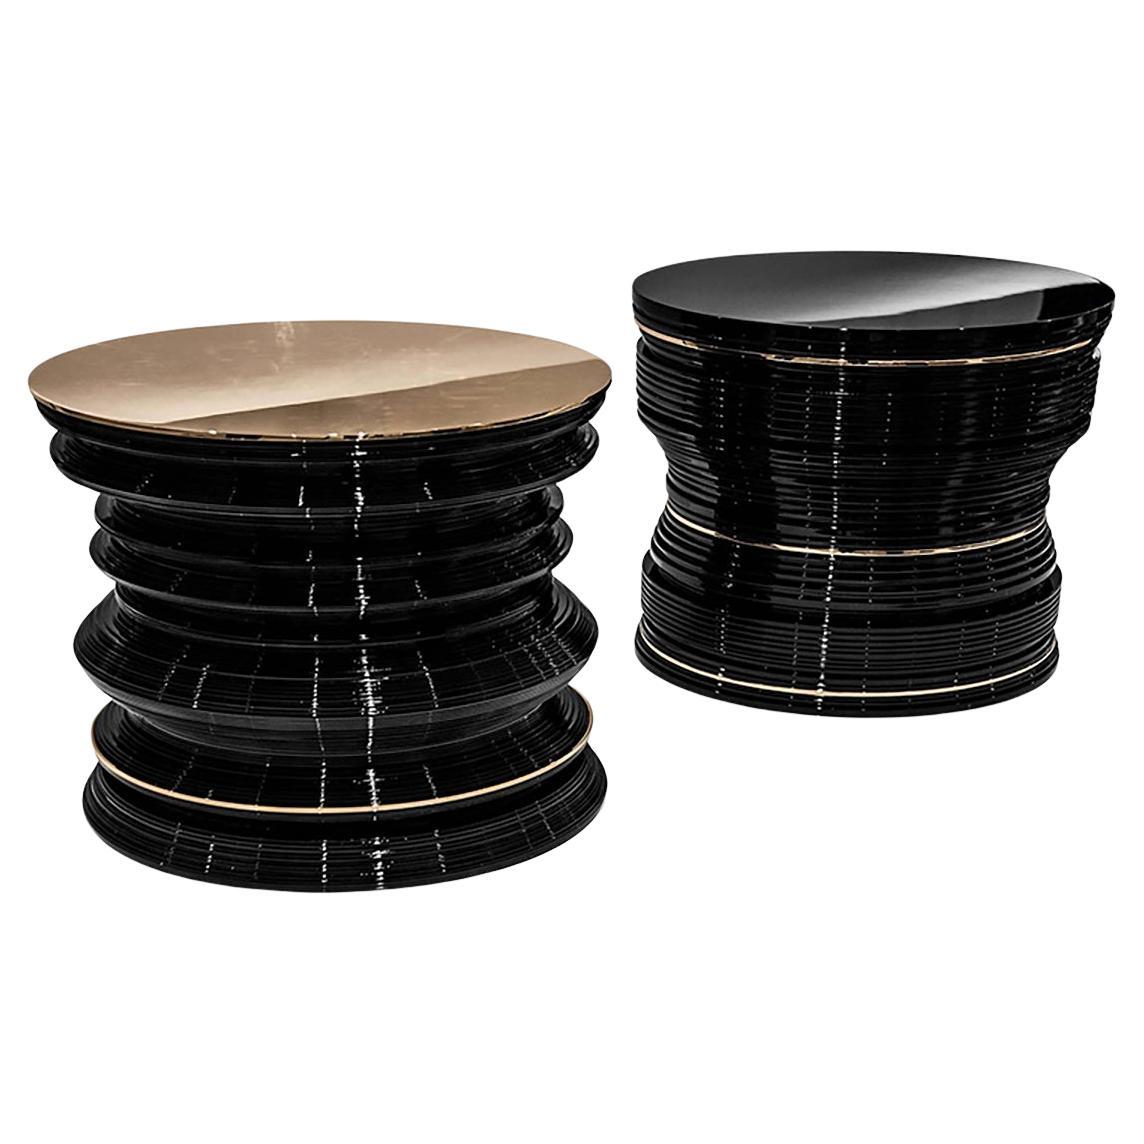 Architecturally designed to showcase its striated surface and fluid structure, the Mille 1 and 2 feature high gloss black lacquer with an elegant finish and lustrous bronze details.

Pictured with a black lacquer top and a striated structure